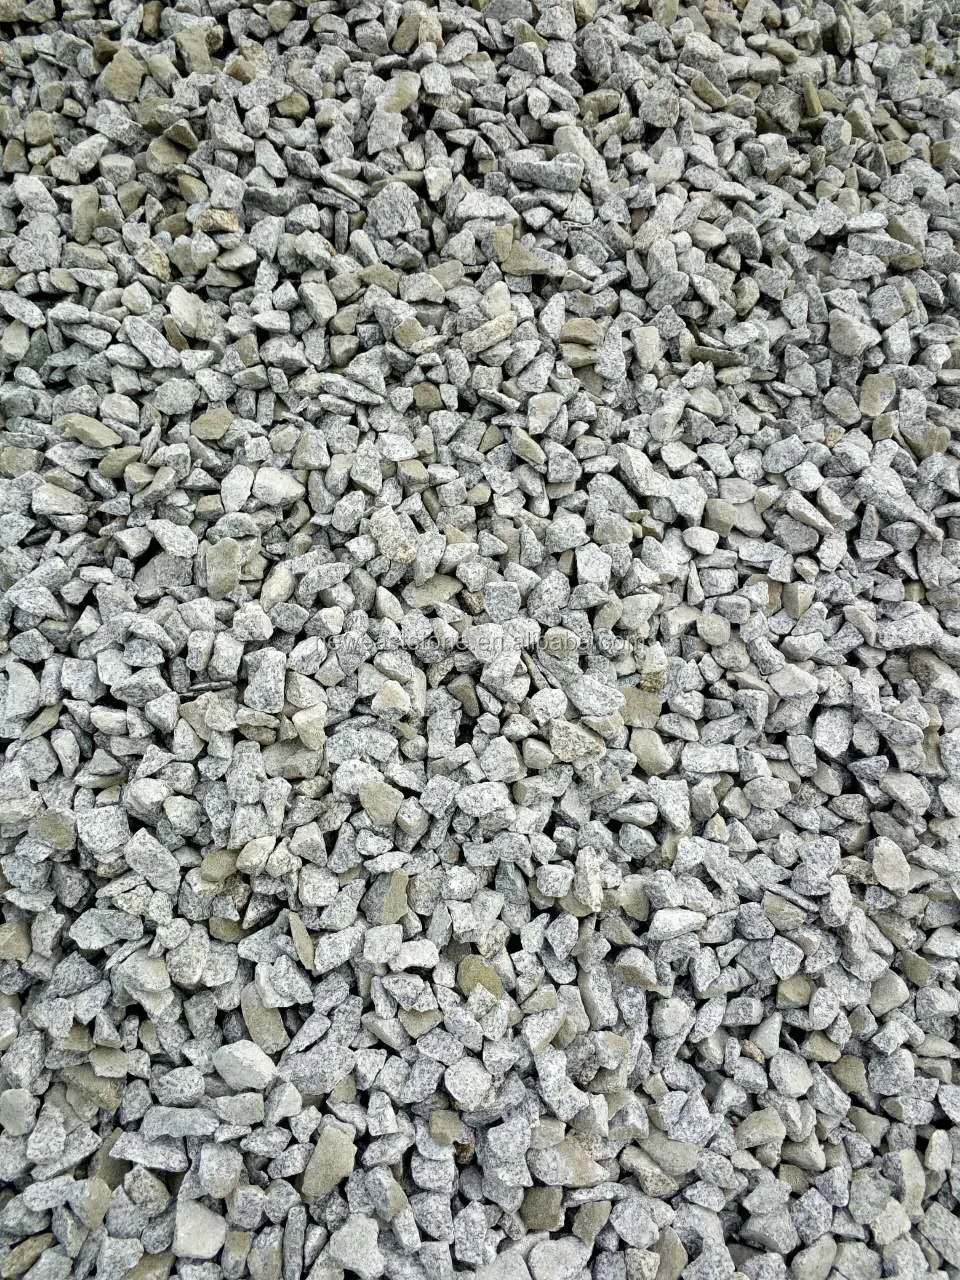 Decorative Gravel Aggregates For Gardens And Driveways - Buy Aggregates ...